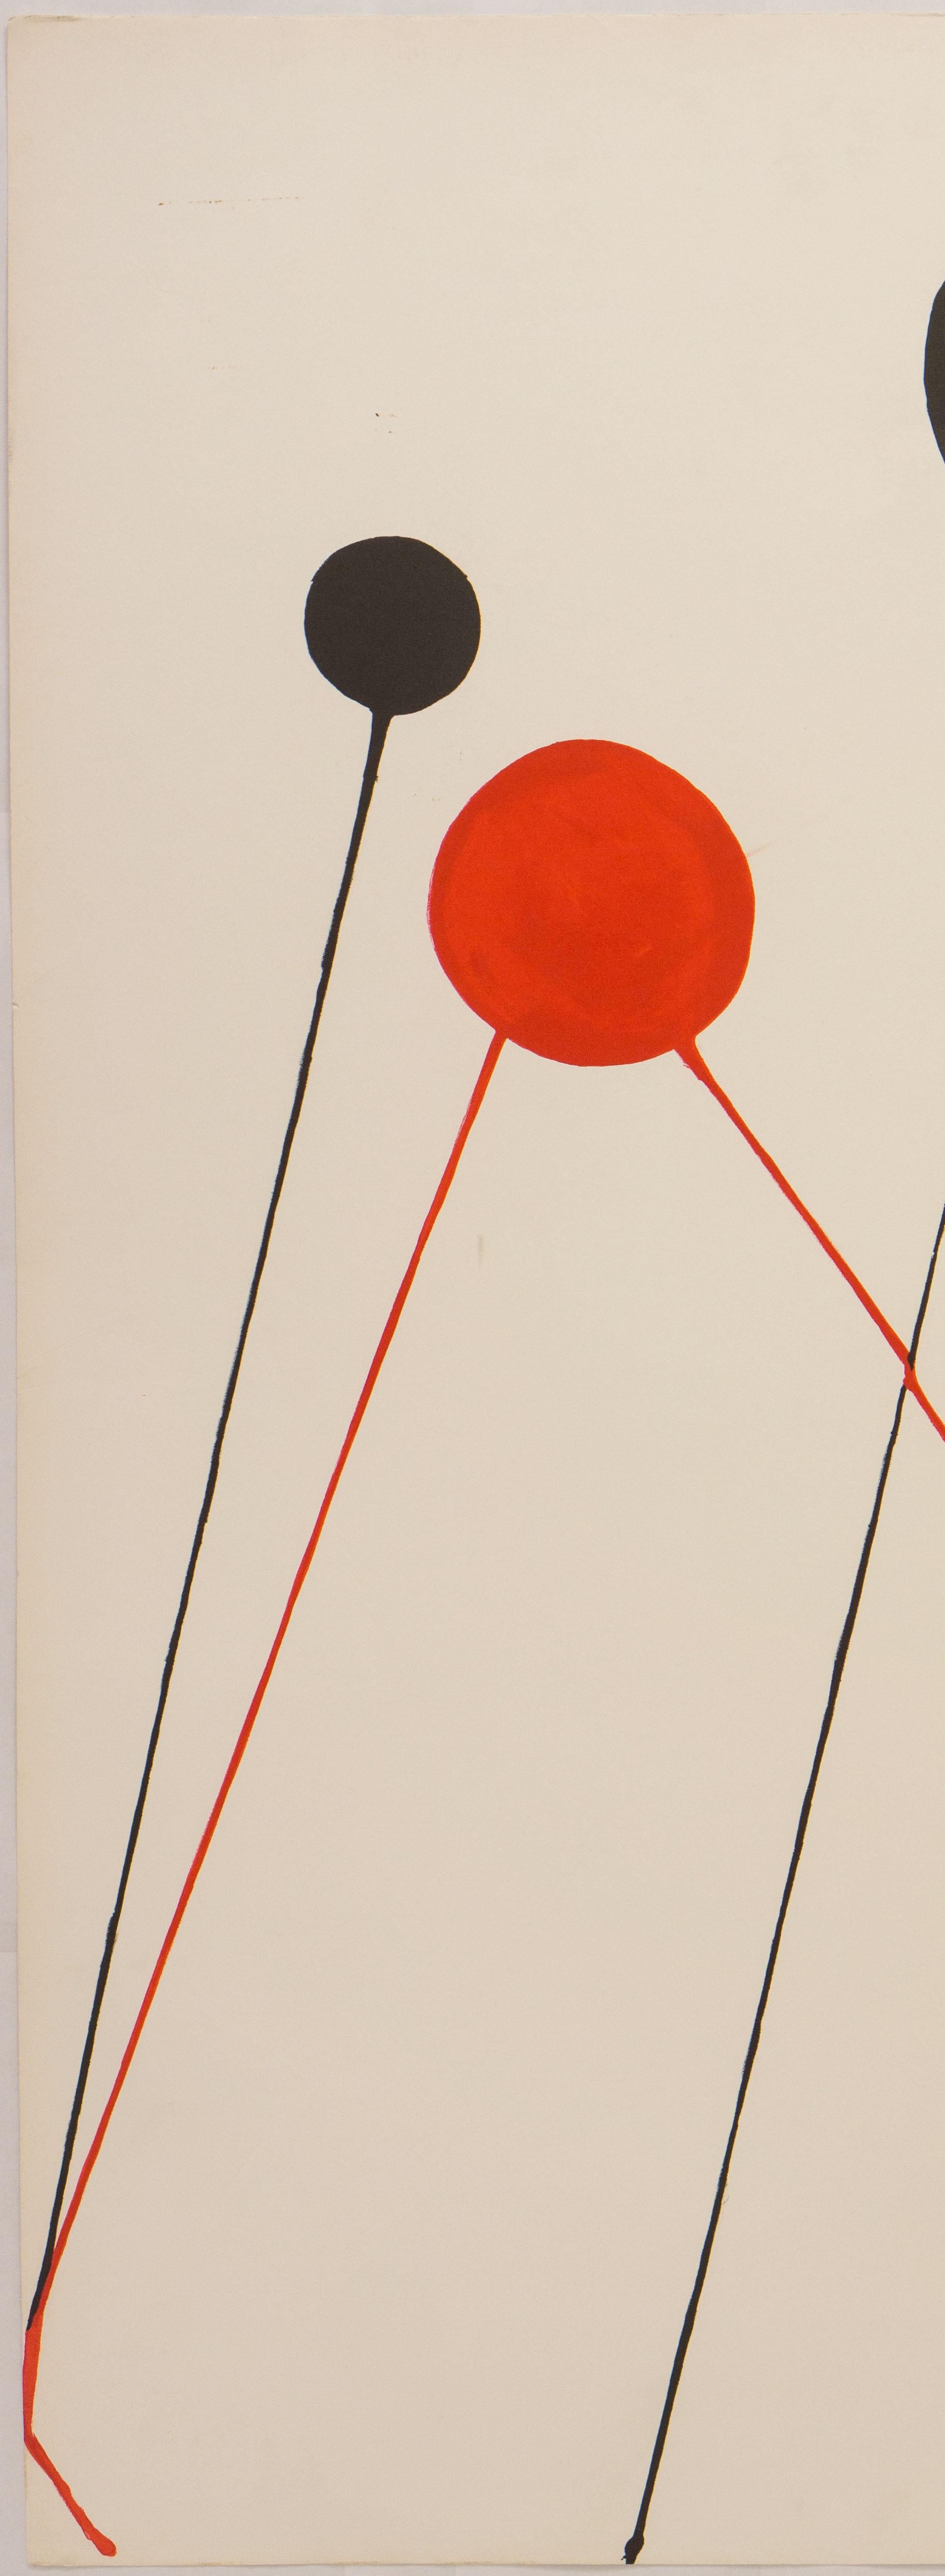 Balloons - Beige Abstract Print by (after) Alexander Calder